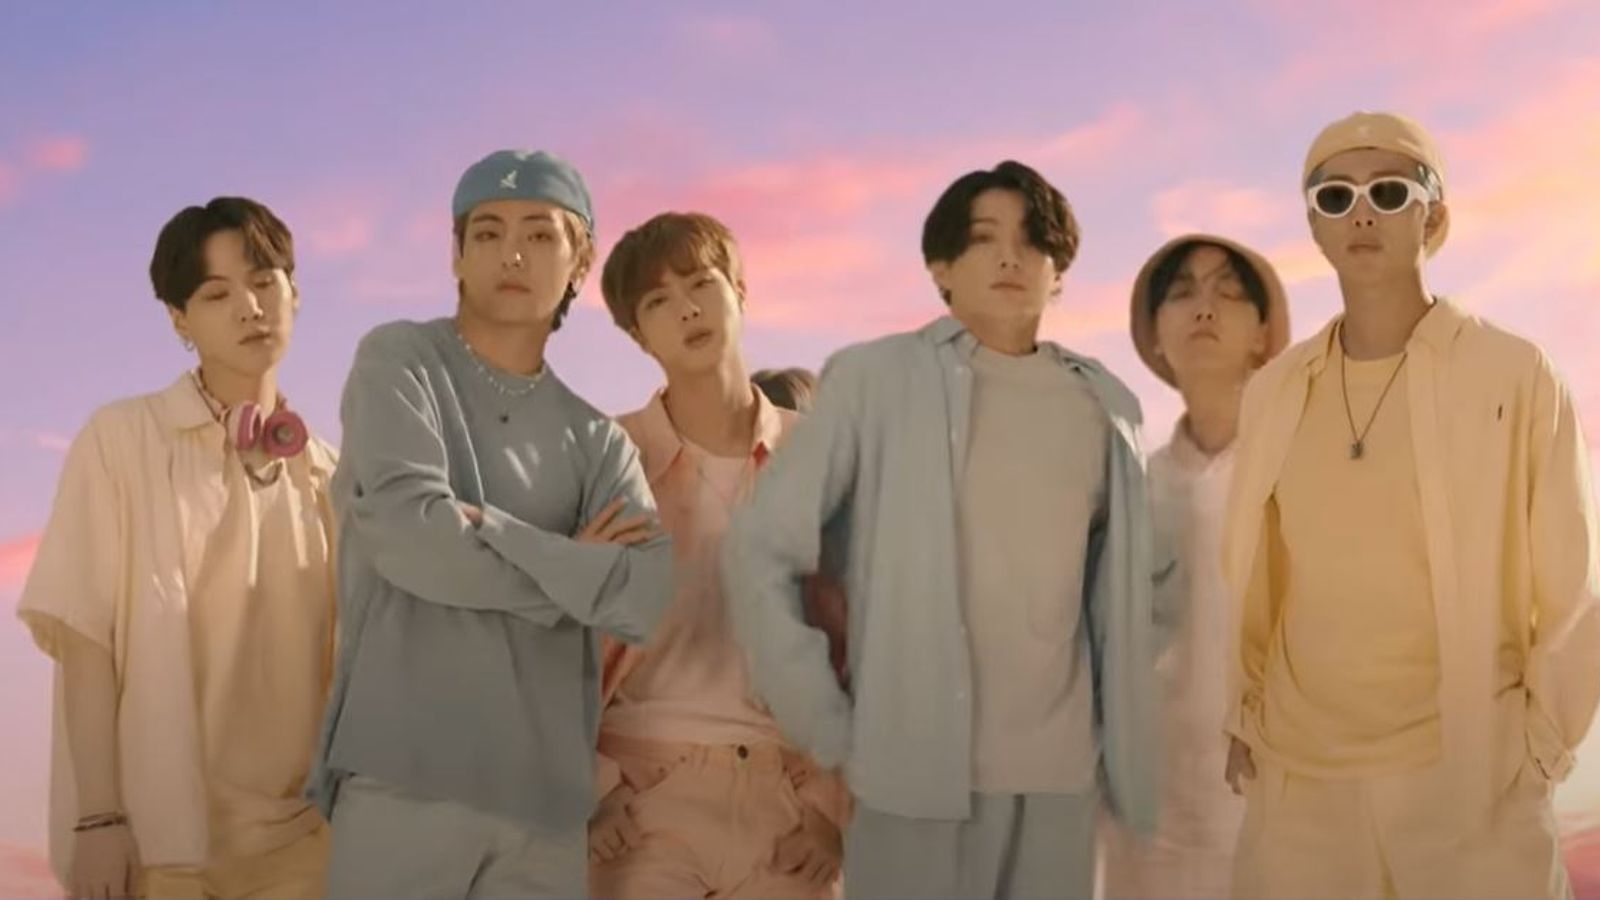 BTS standing in front of a colorful sky in their Dynamite music video.